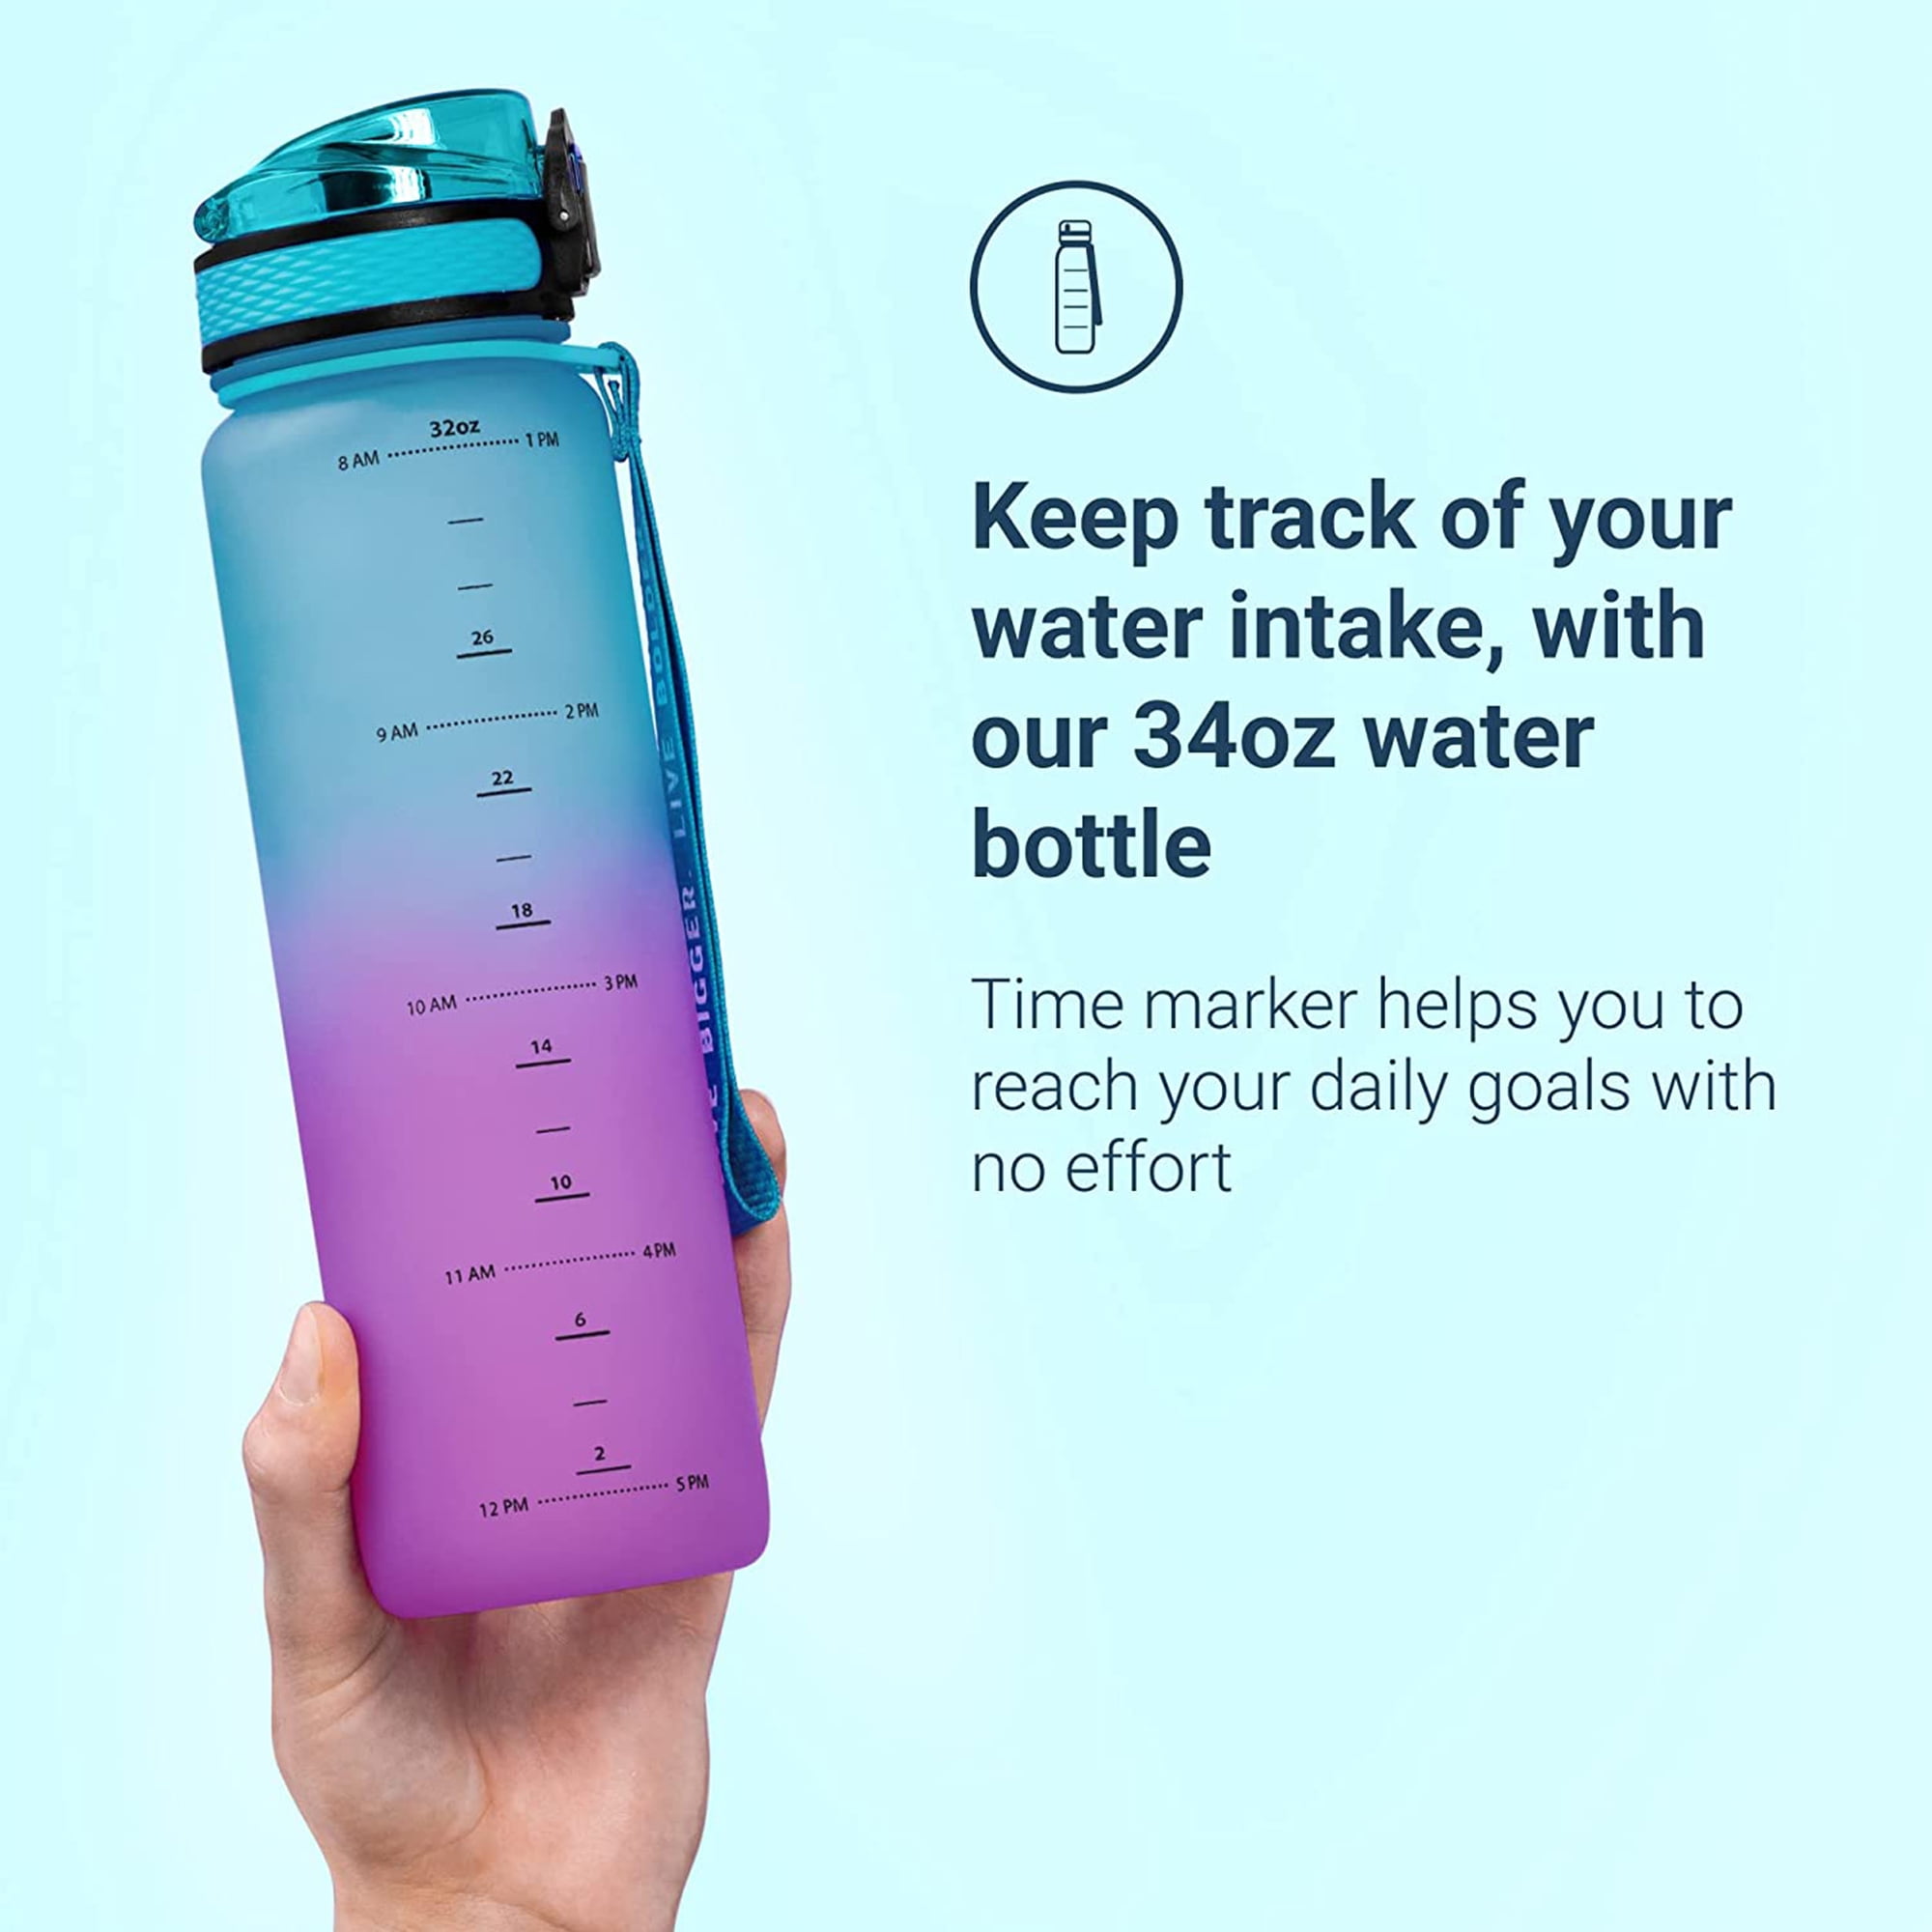 Live Infinitely Gym Water Bottle with Time Marker Fruit Infuser and Shaker 34 oz Lilac, Size: 34oz, Purple